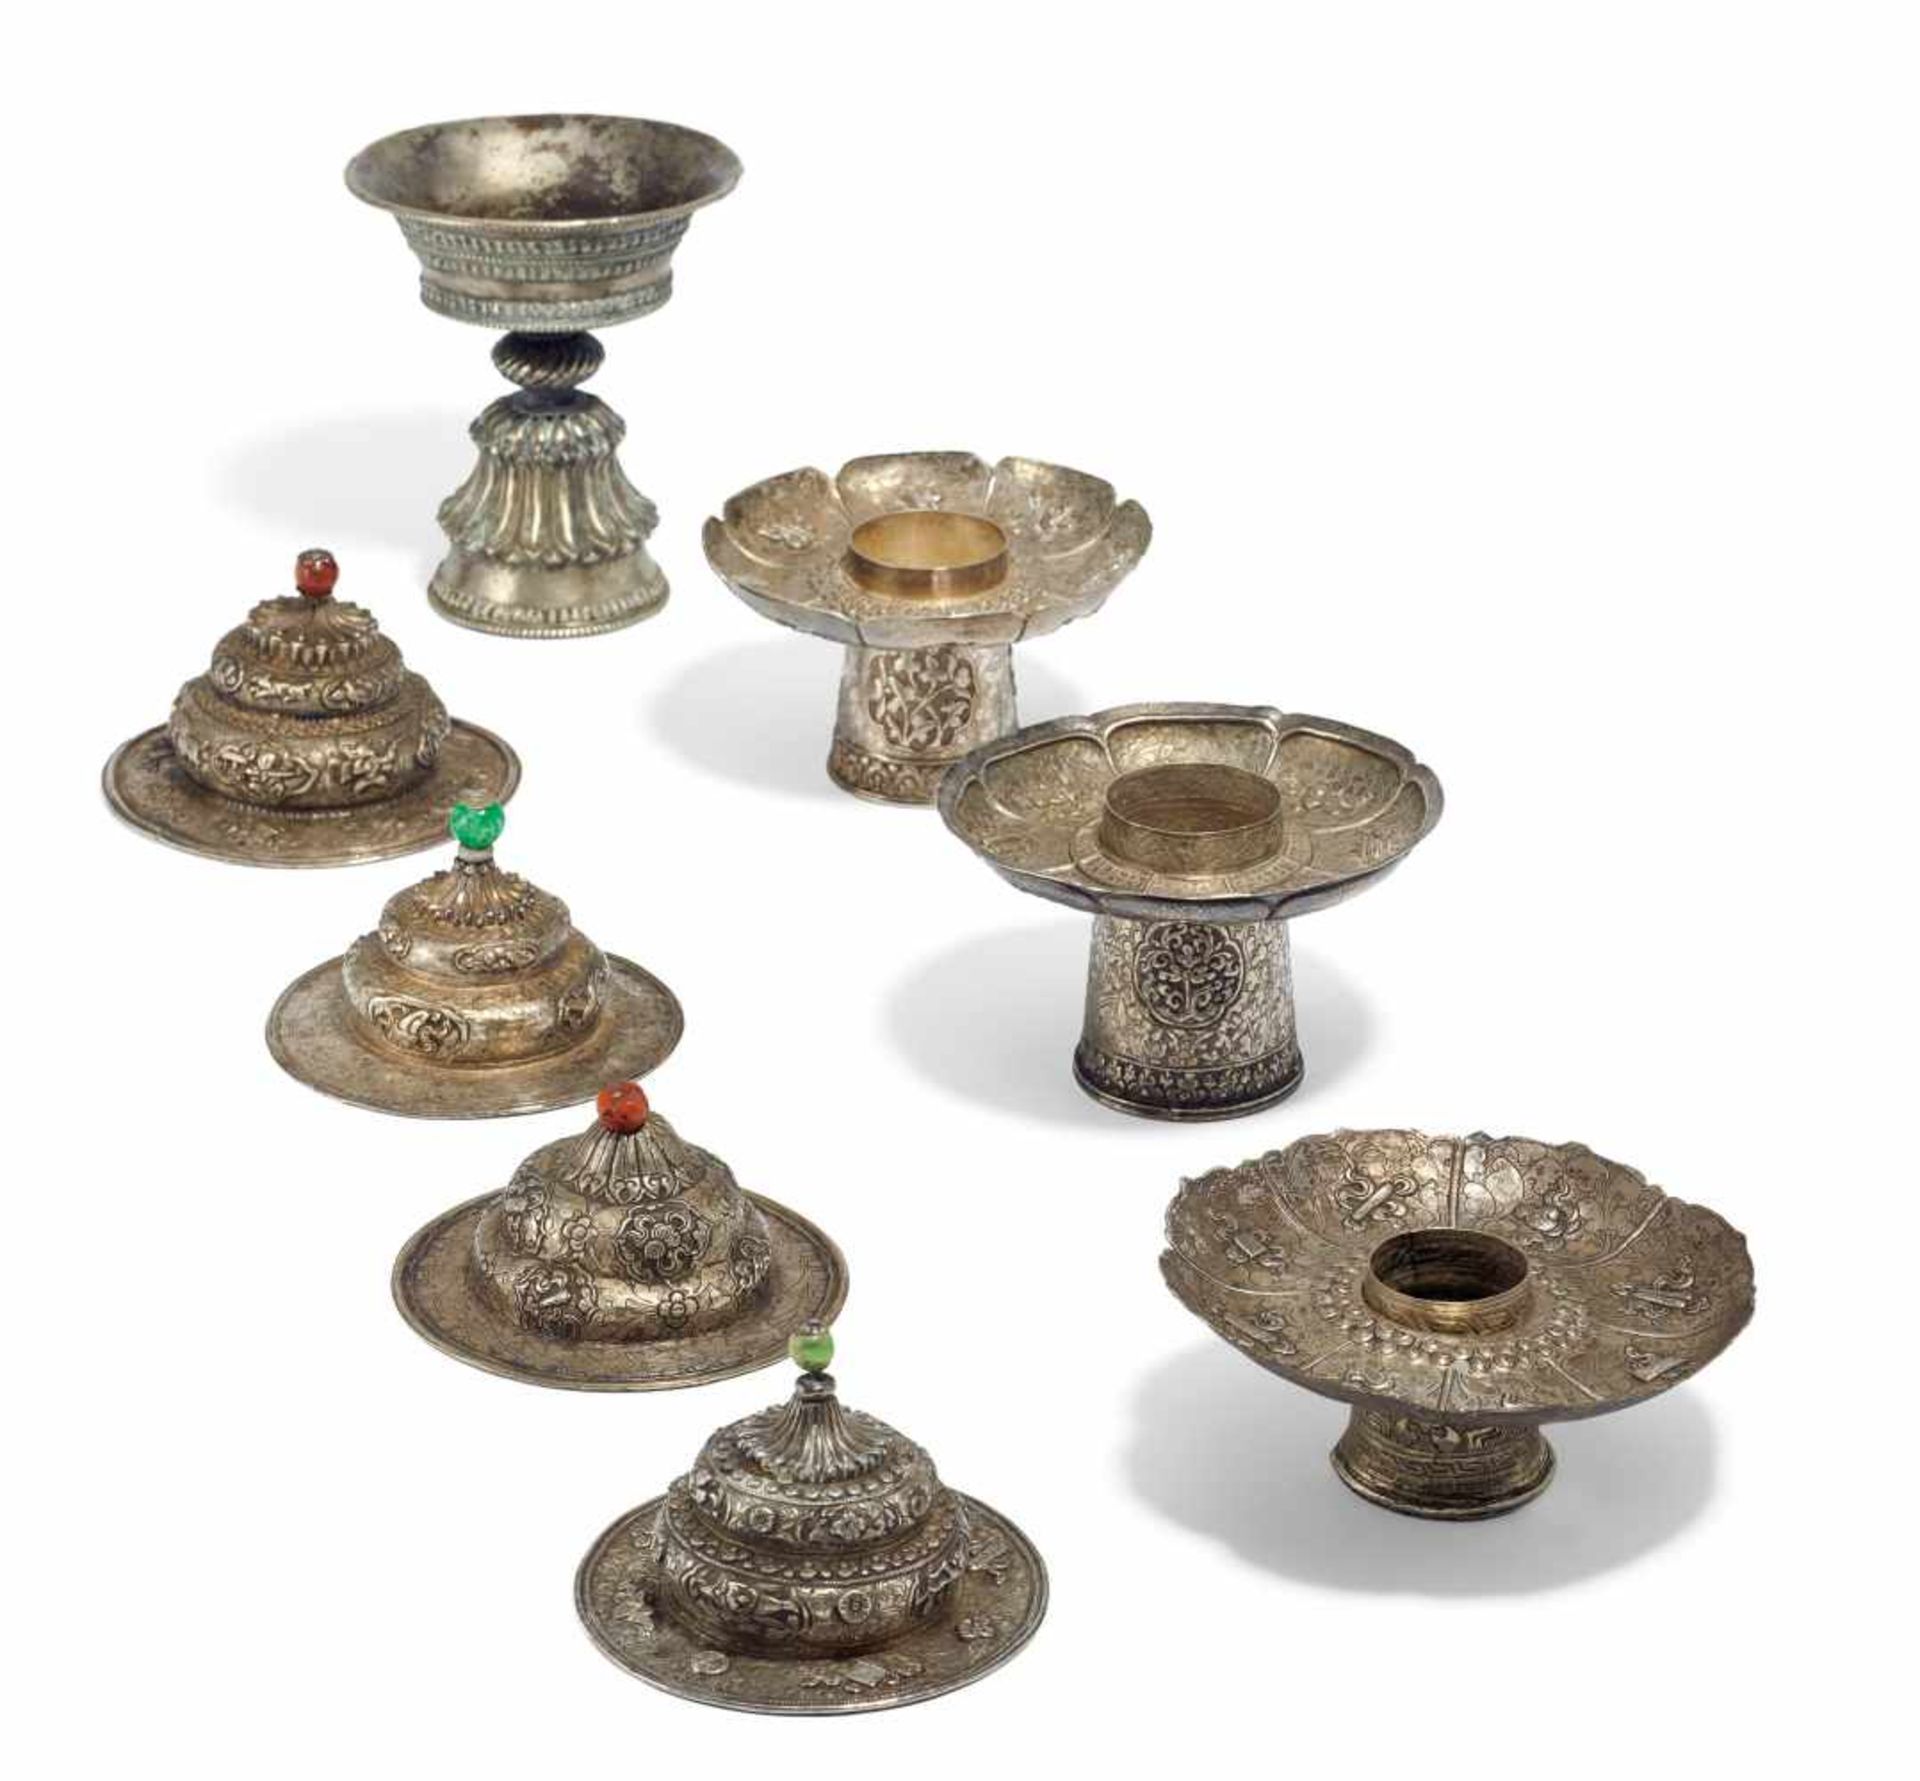 ONE BUTTER LAMP, THREE BASES AND FOUR LIDS FOR TEA BOWLS. Tibet. 19th/20th c. Silver in repoussé.